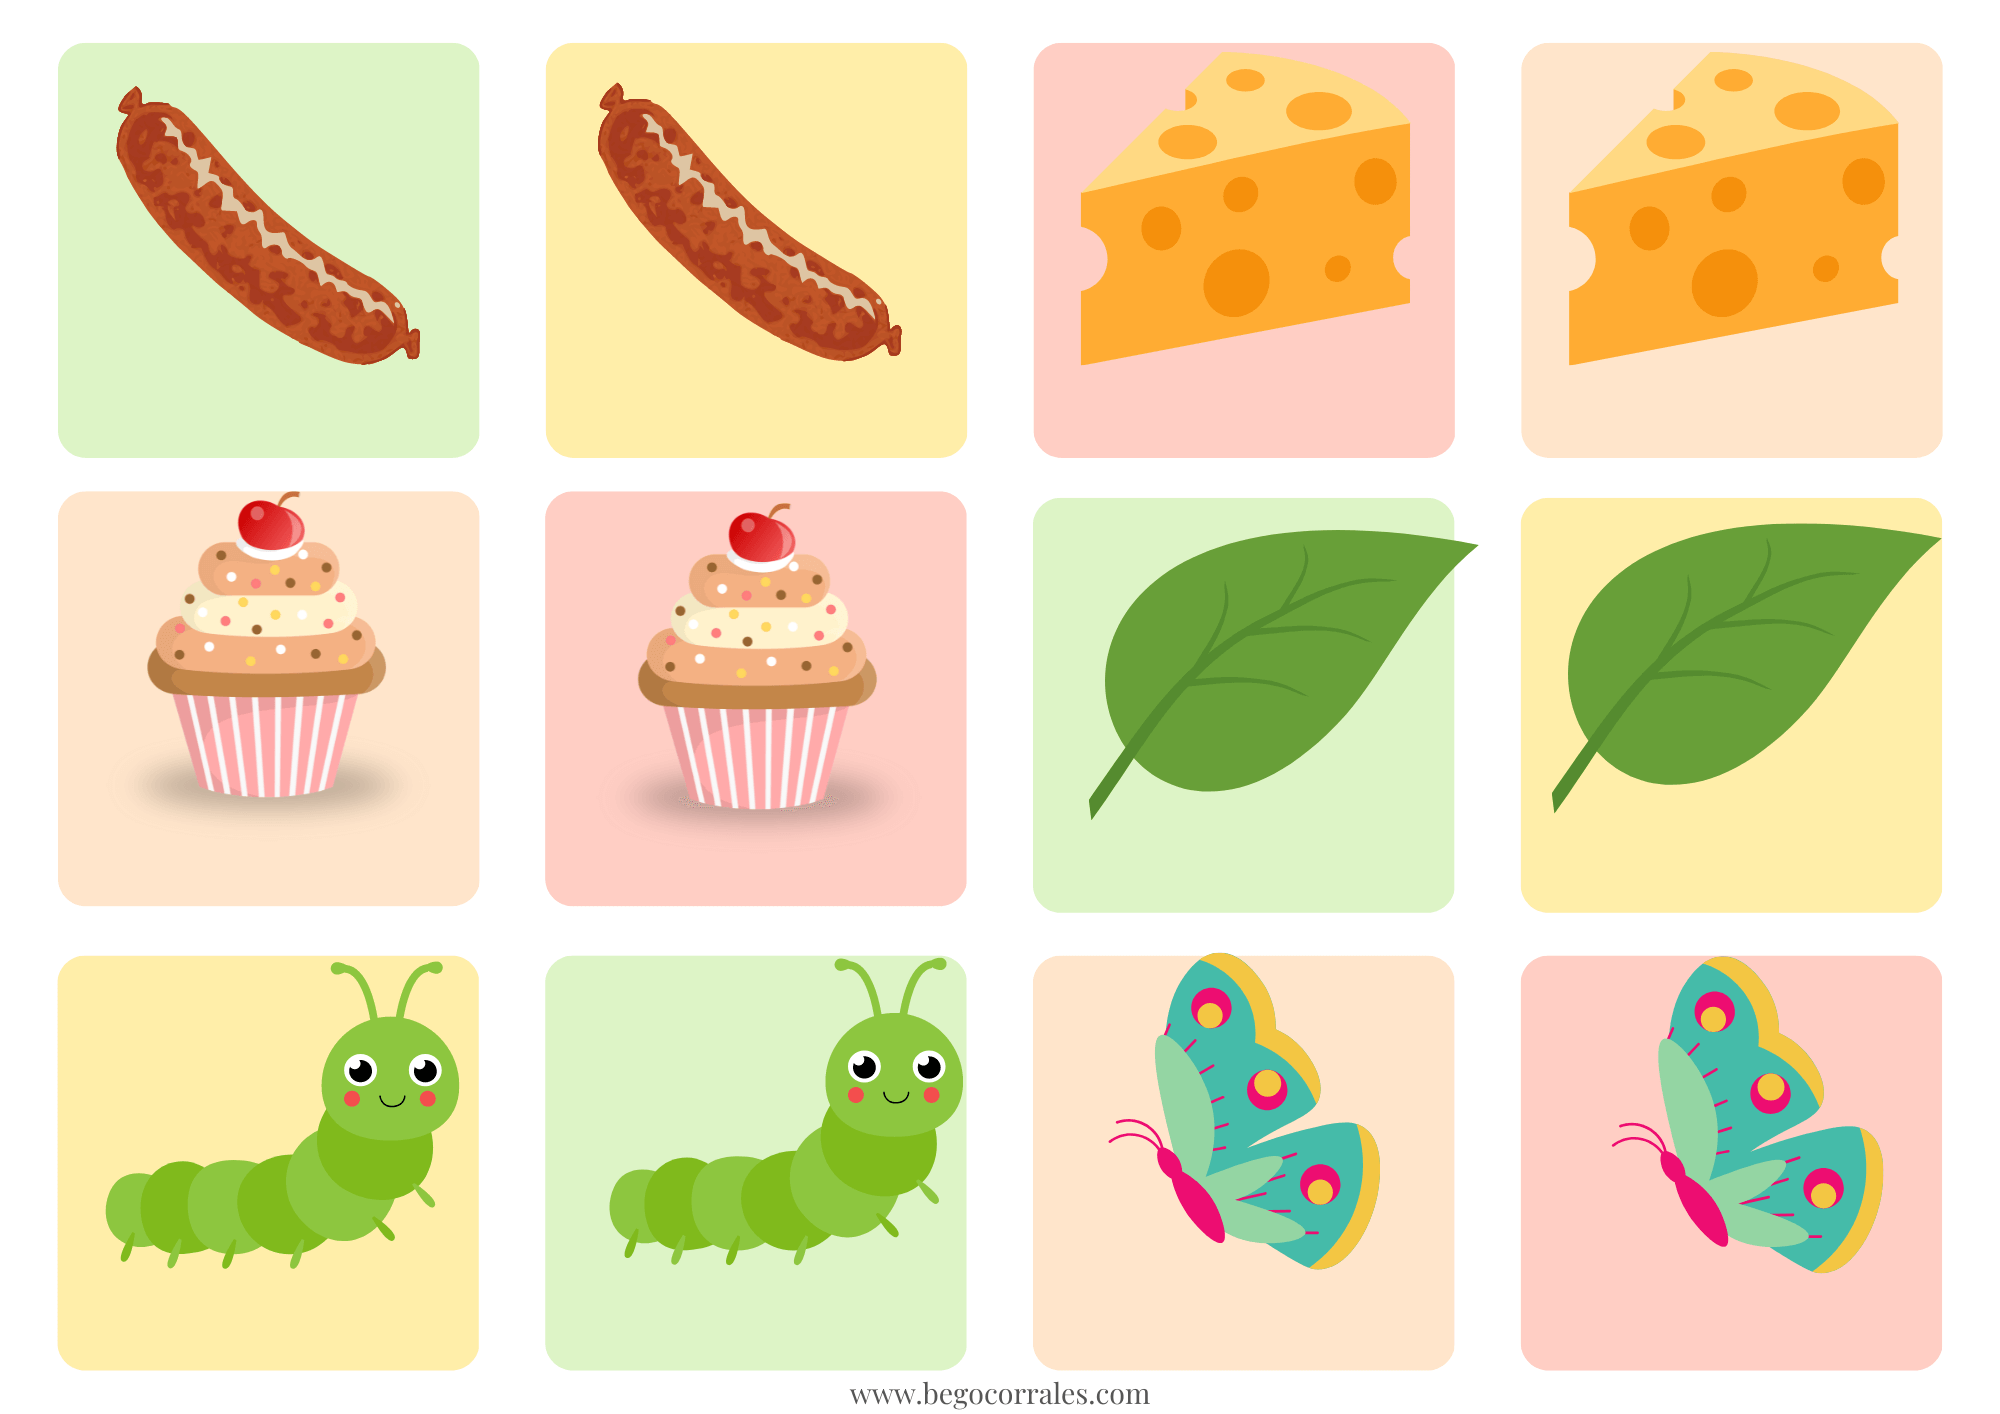 The very hungry caterpillar memory cards